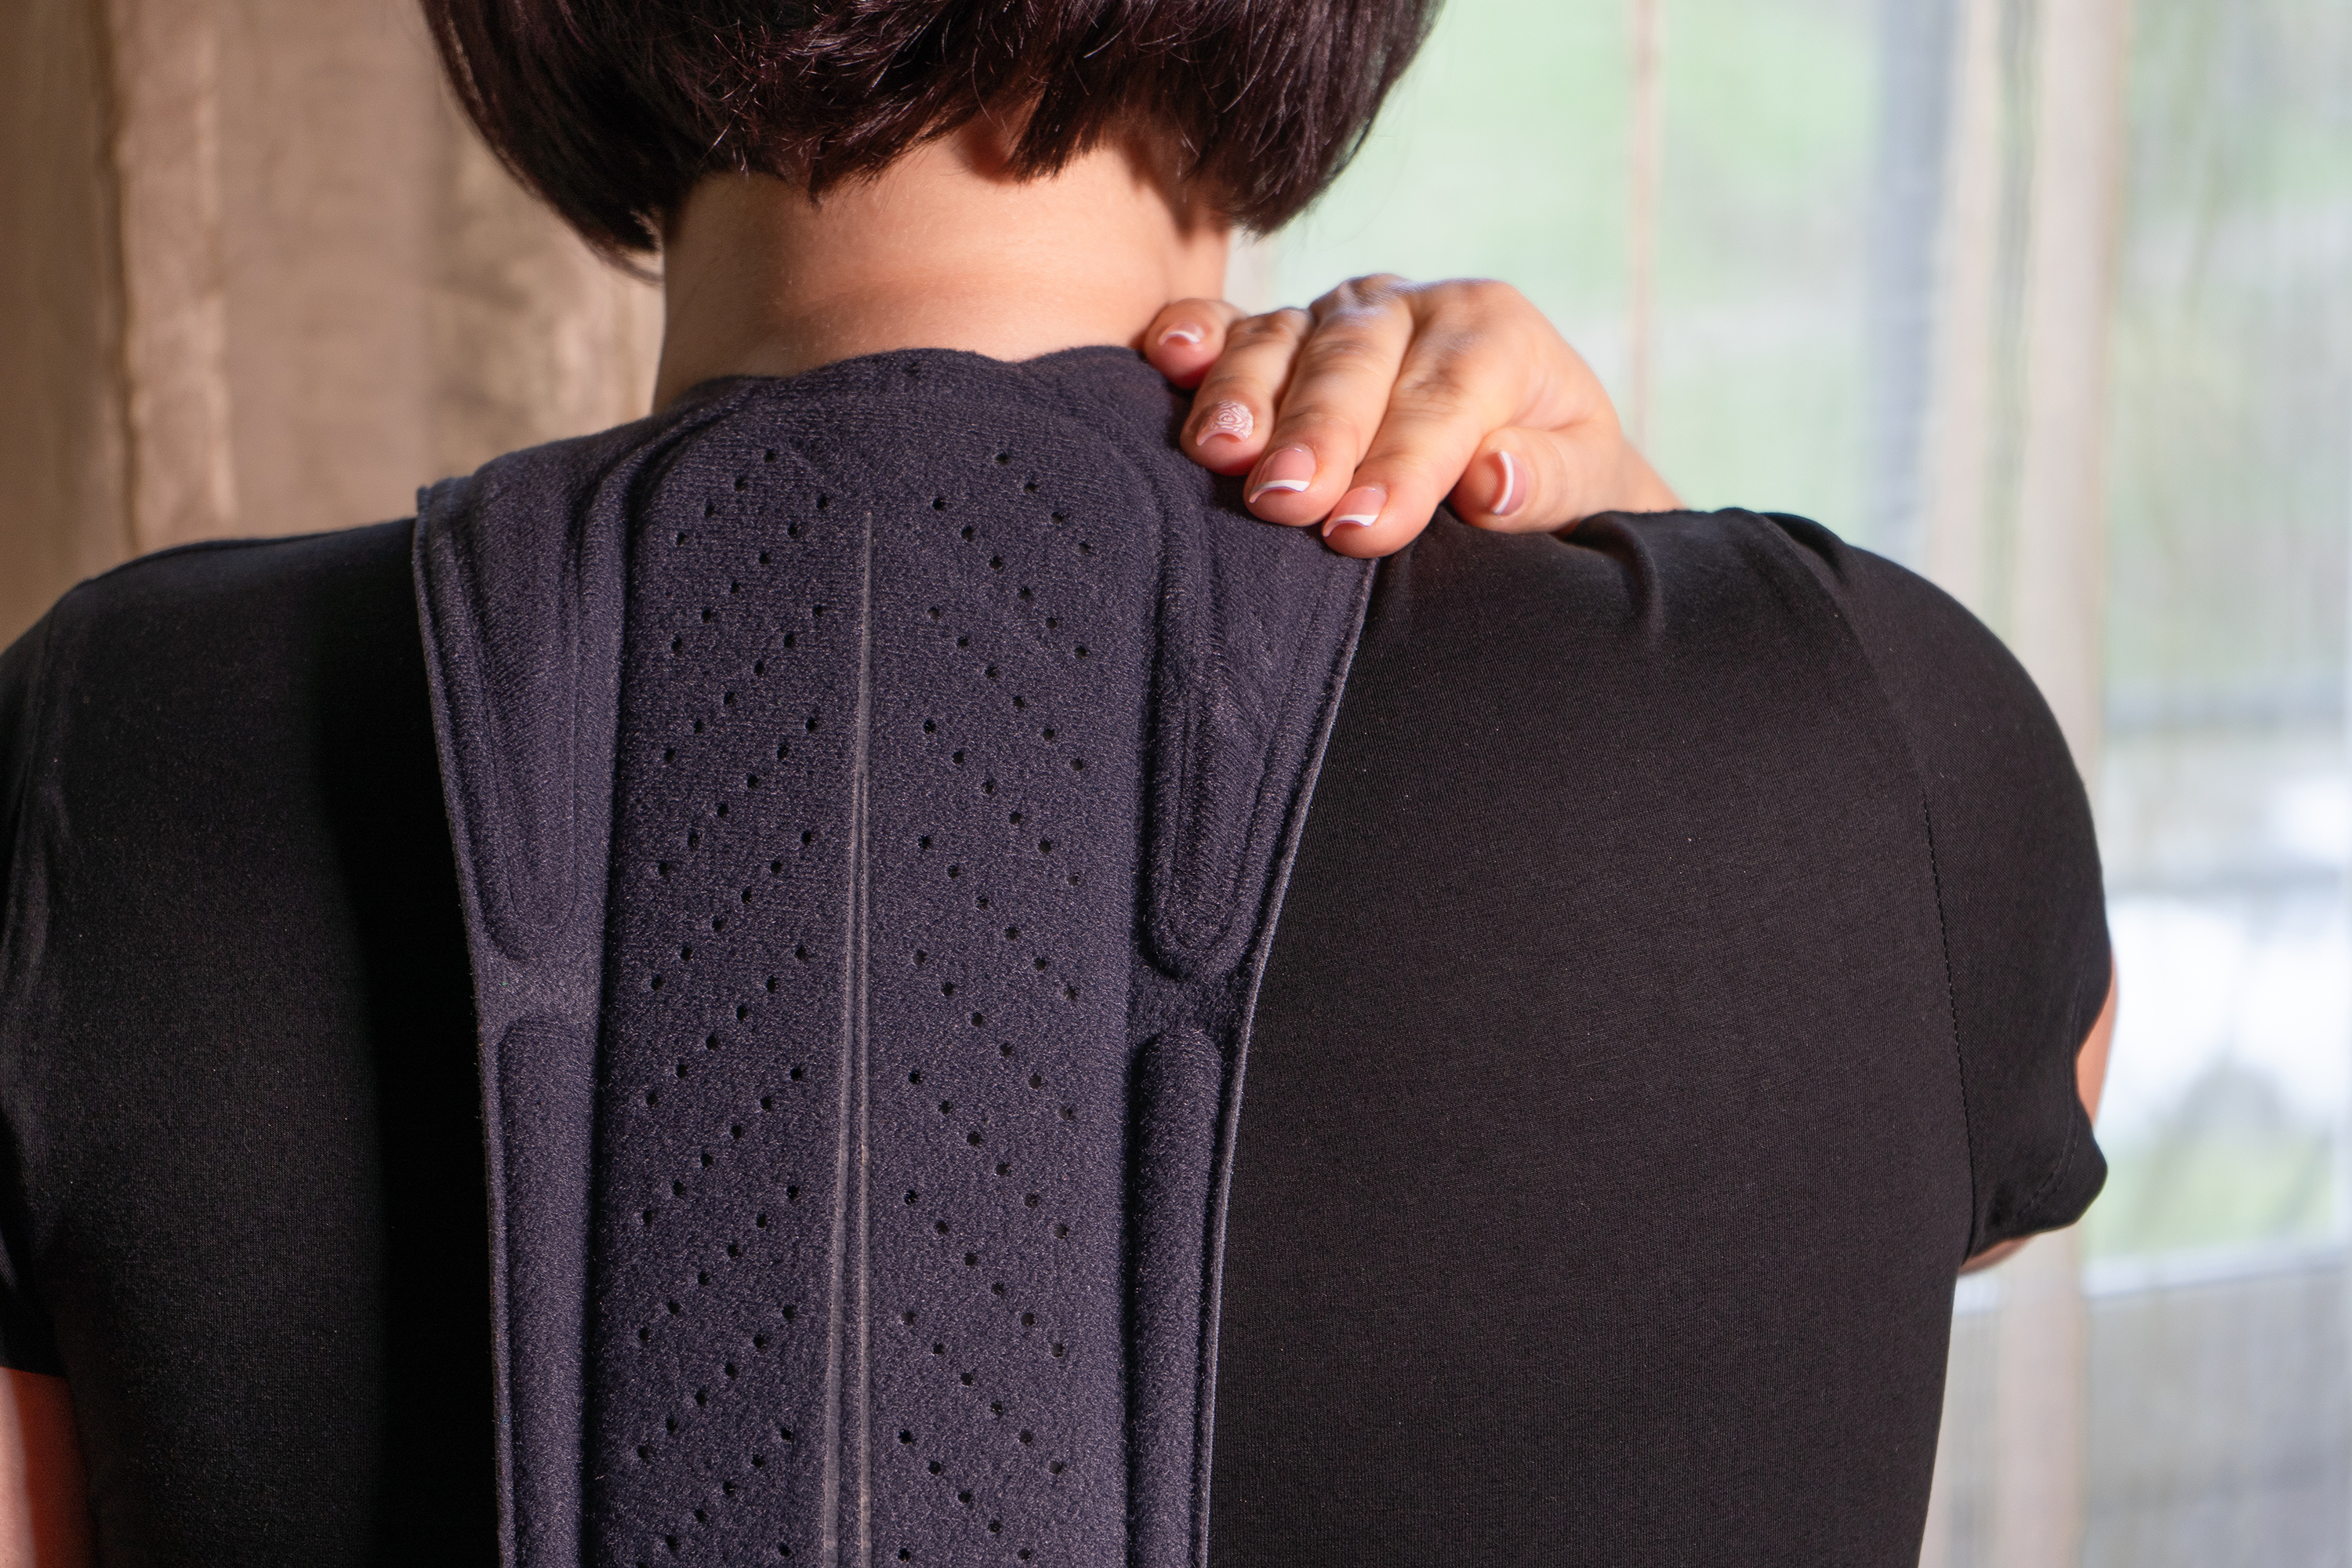 Back Brace for Scoliosis: Types and Uses